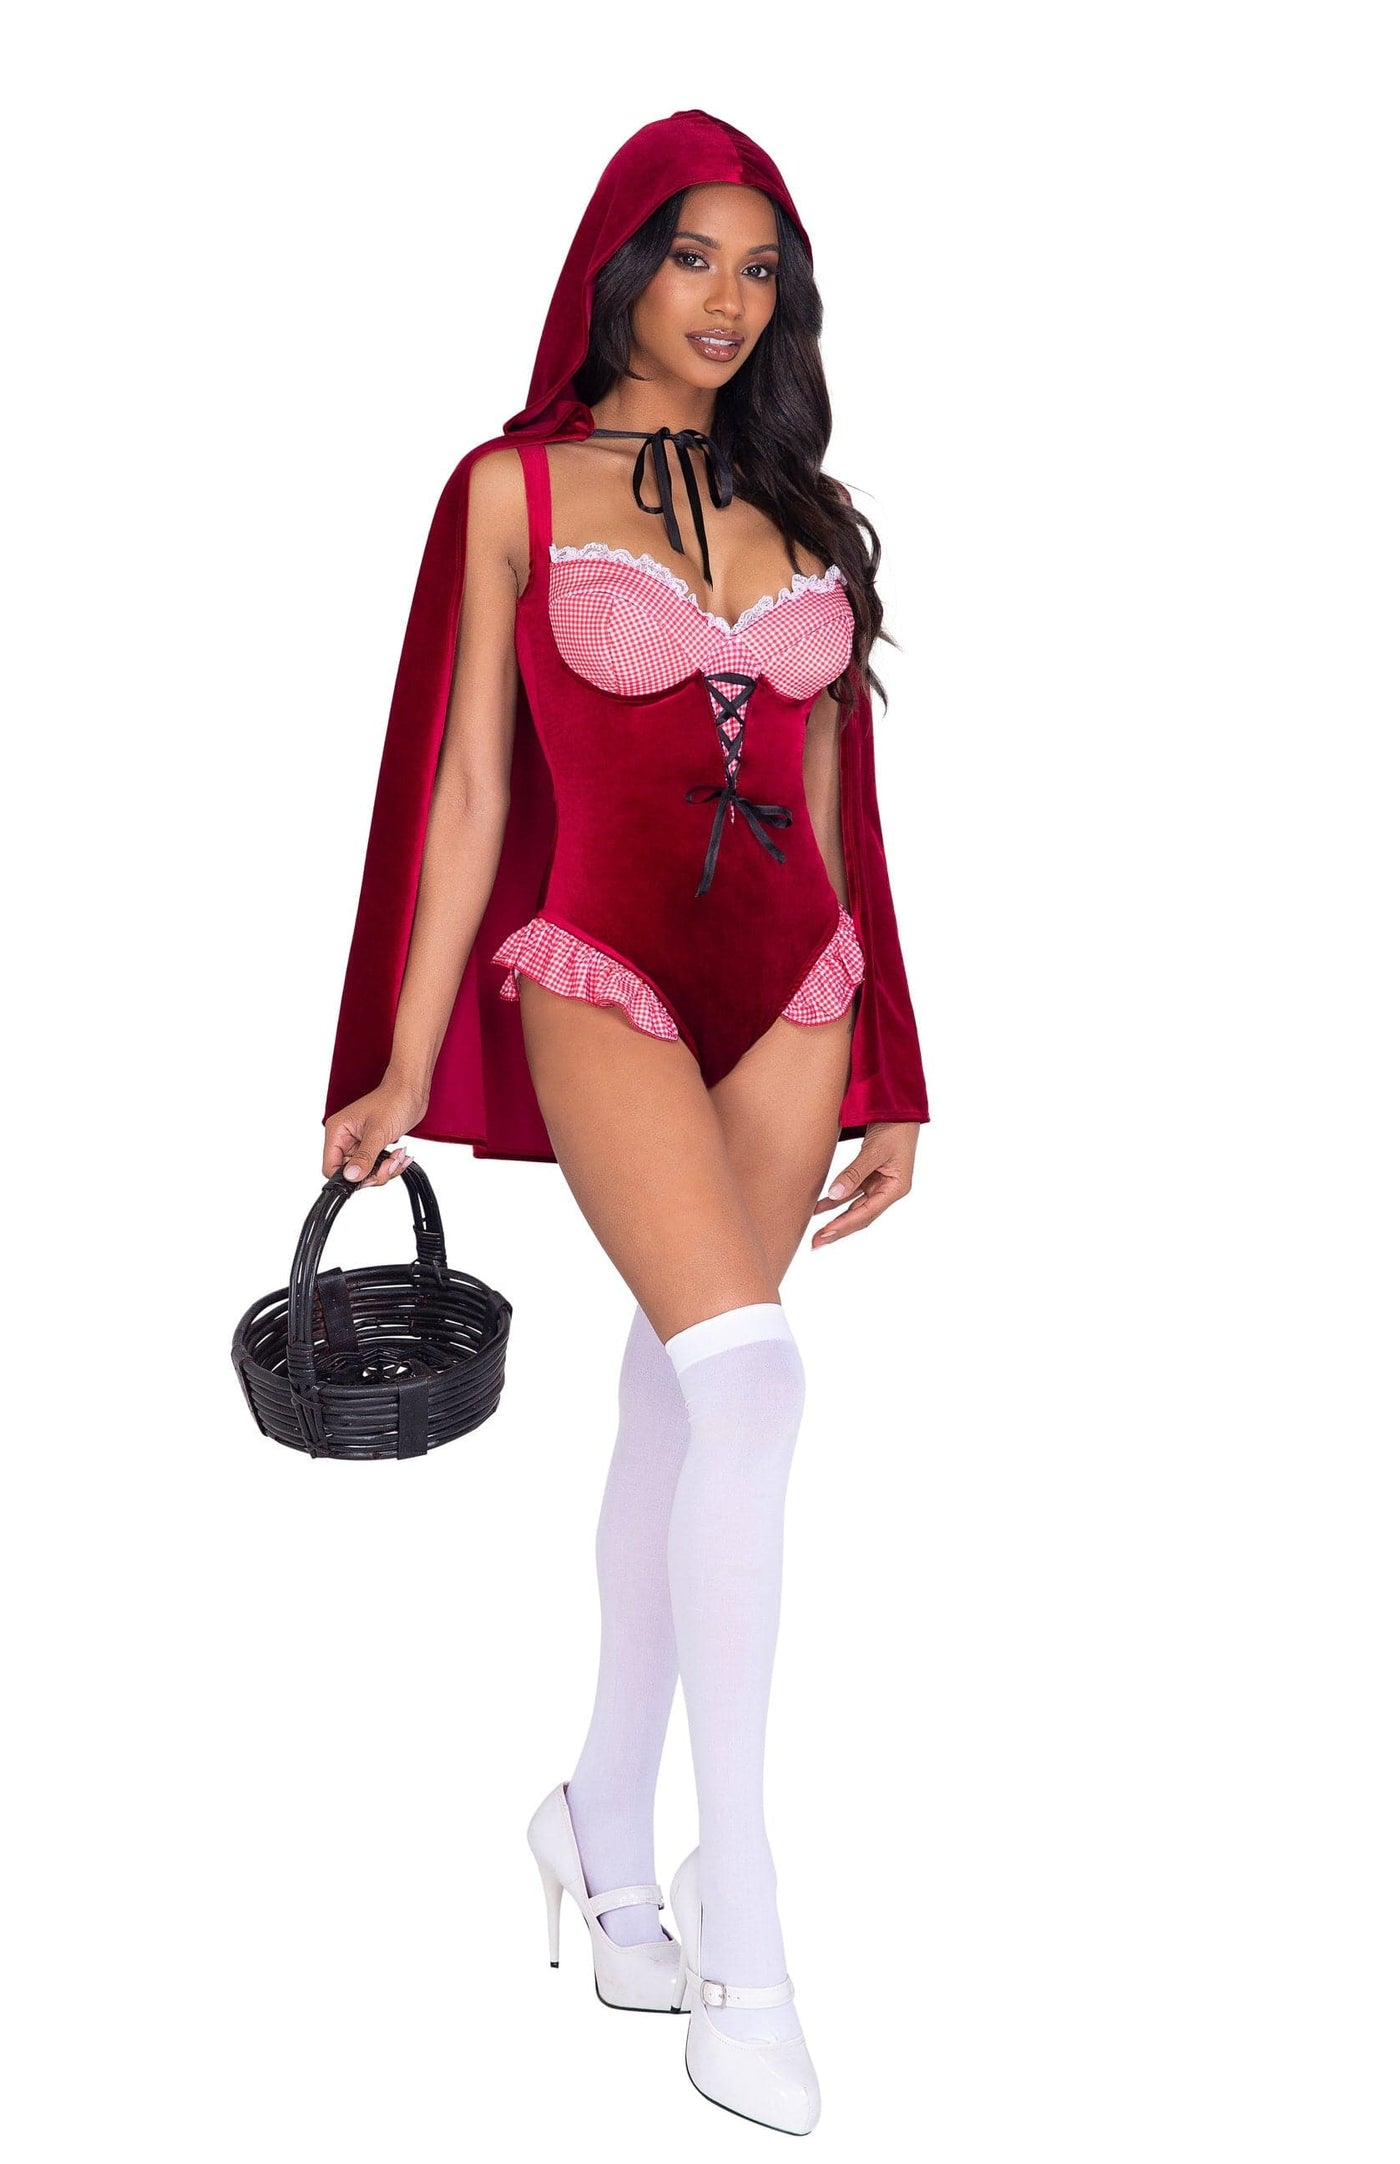 2pc. Storybook Little Red Women's Costume - For Love of Lingerie